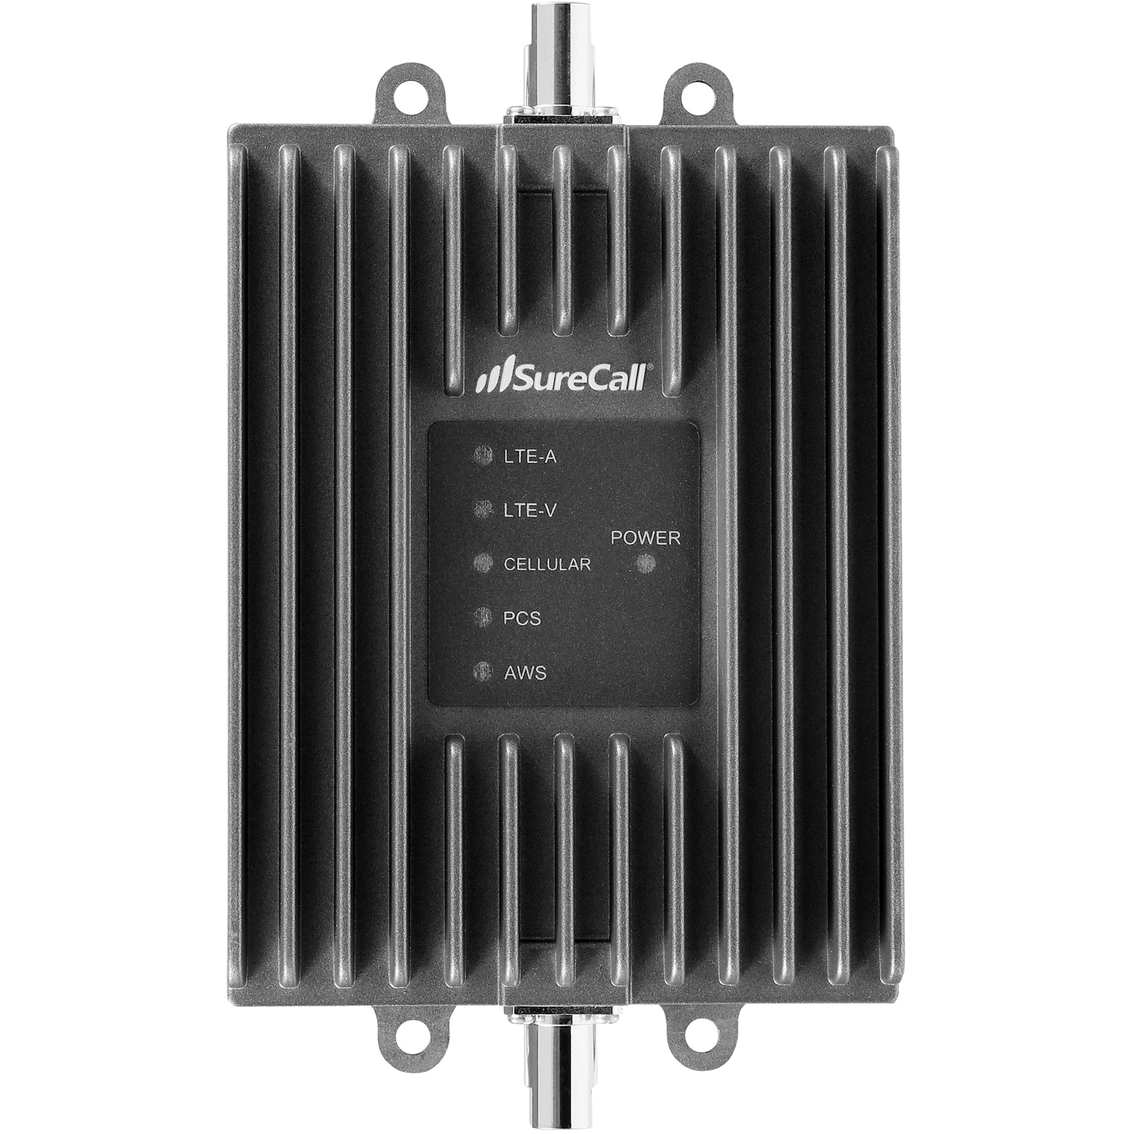 Surecall Fusion2go Max In-vehicle Cell Phone Signal Booster - Image 3 of 9